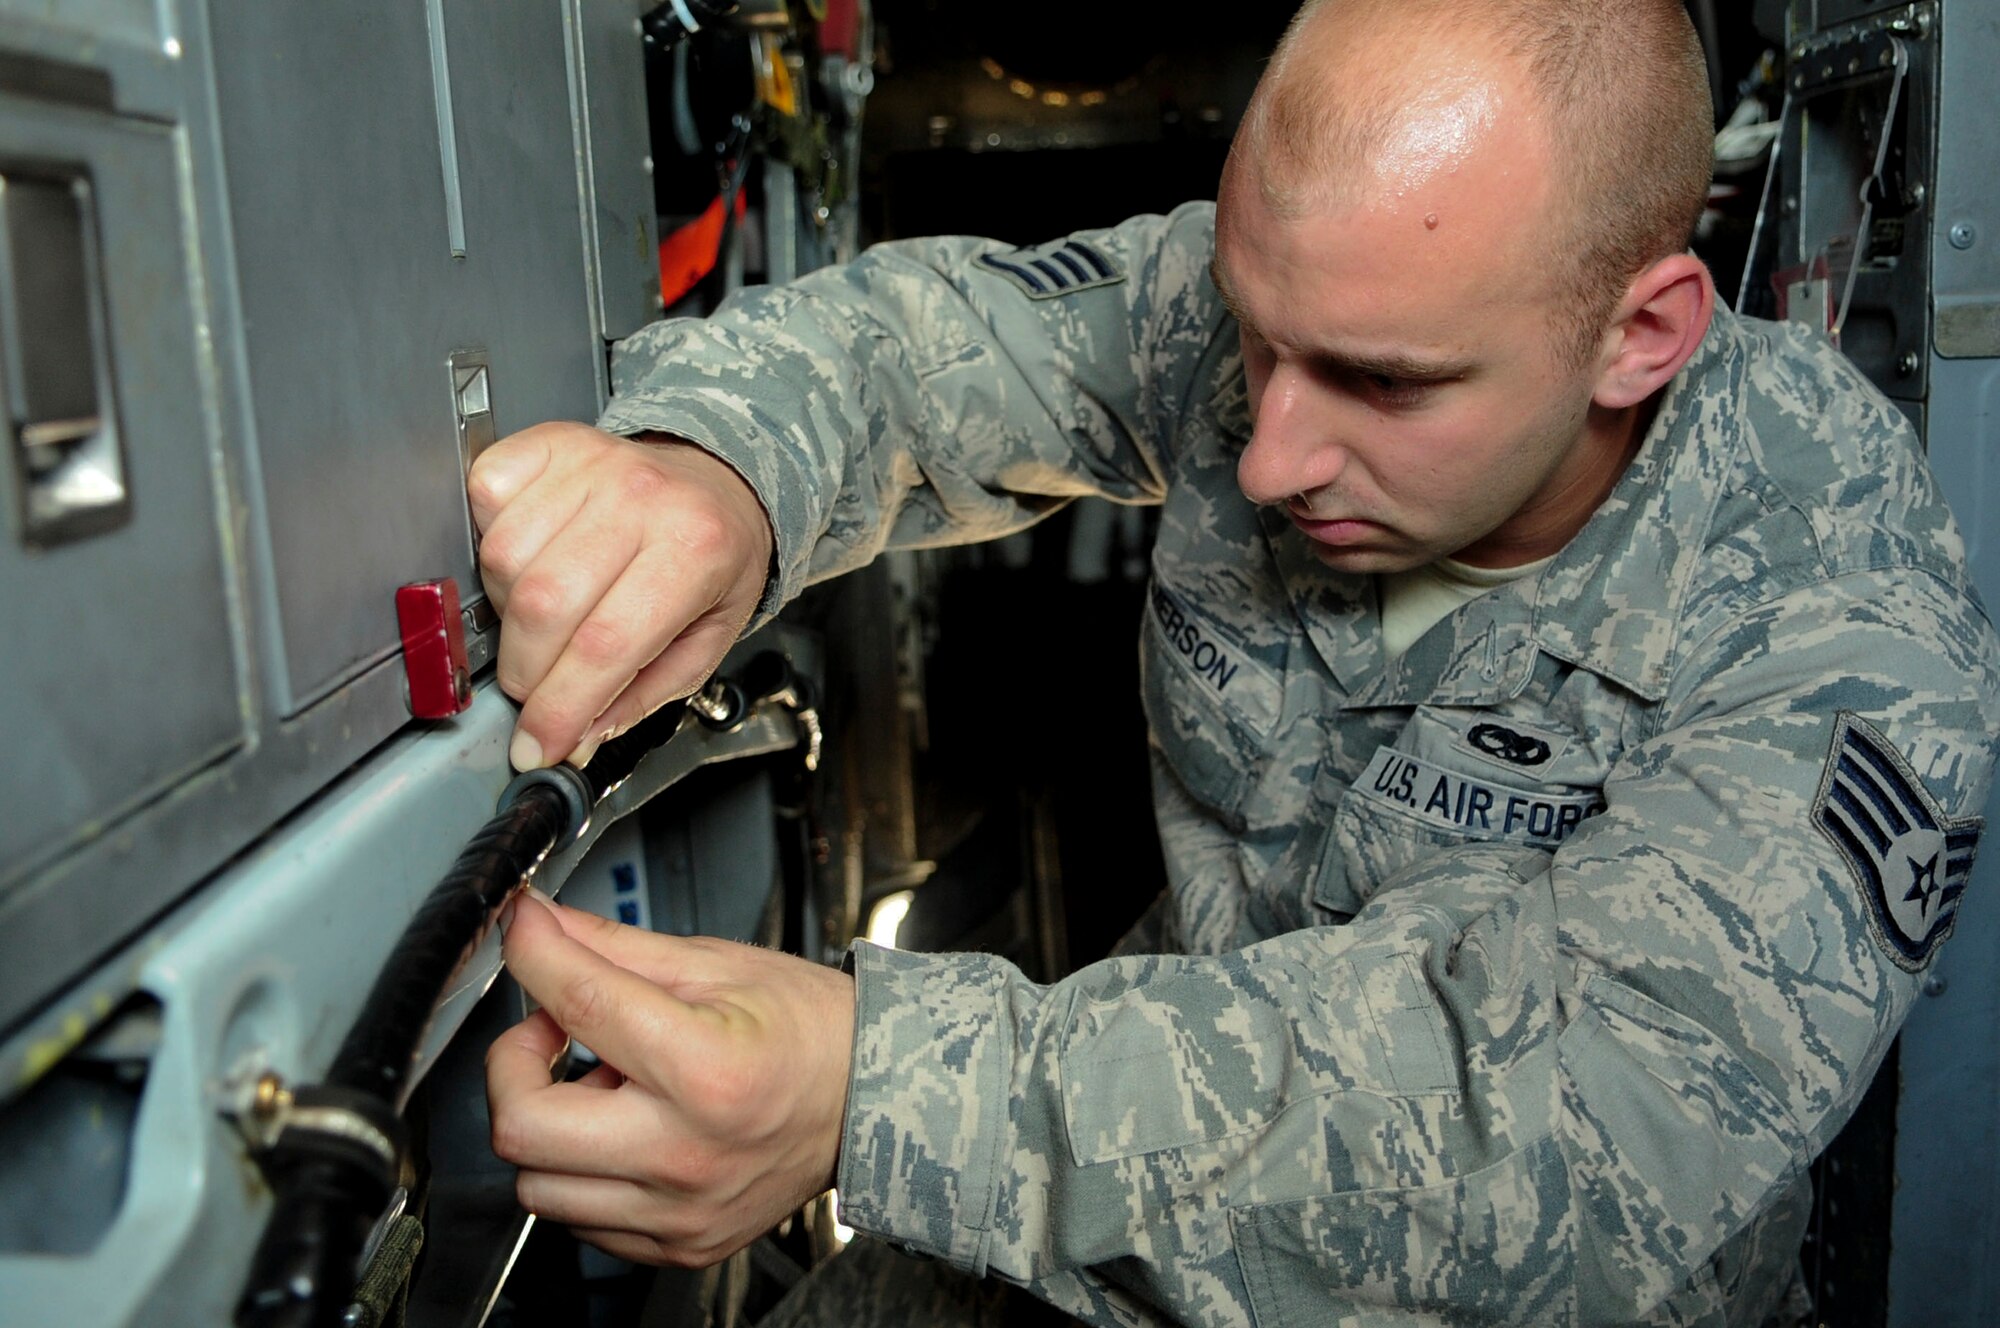 ELLSWORTH AIR FORCE BASE, S.D. - Staff Sgt. Bradley Emerson, 28th Aircraft Maintenance Squadron offensive avionics specialist, examines a video display signal cable for any damage, June 30.  This video display cable is connected to a B-1B Lancer sniper pod, which provides video for weapons system officers while flying. (U.S. Air Force Photo/Airman 1st Class Corey Hook)